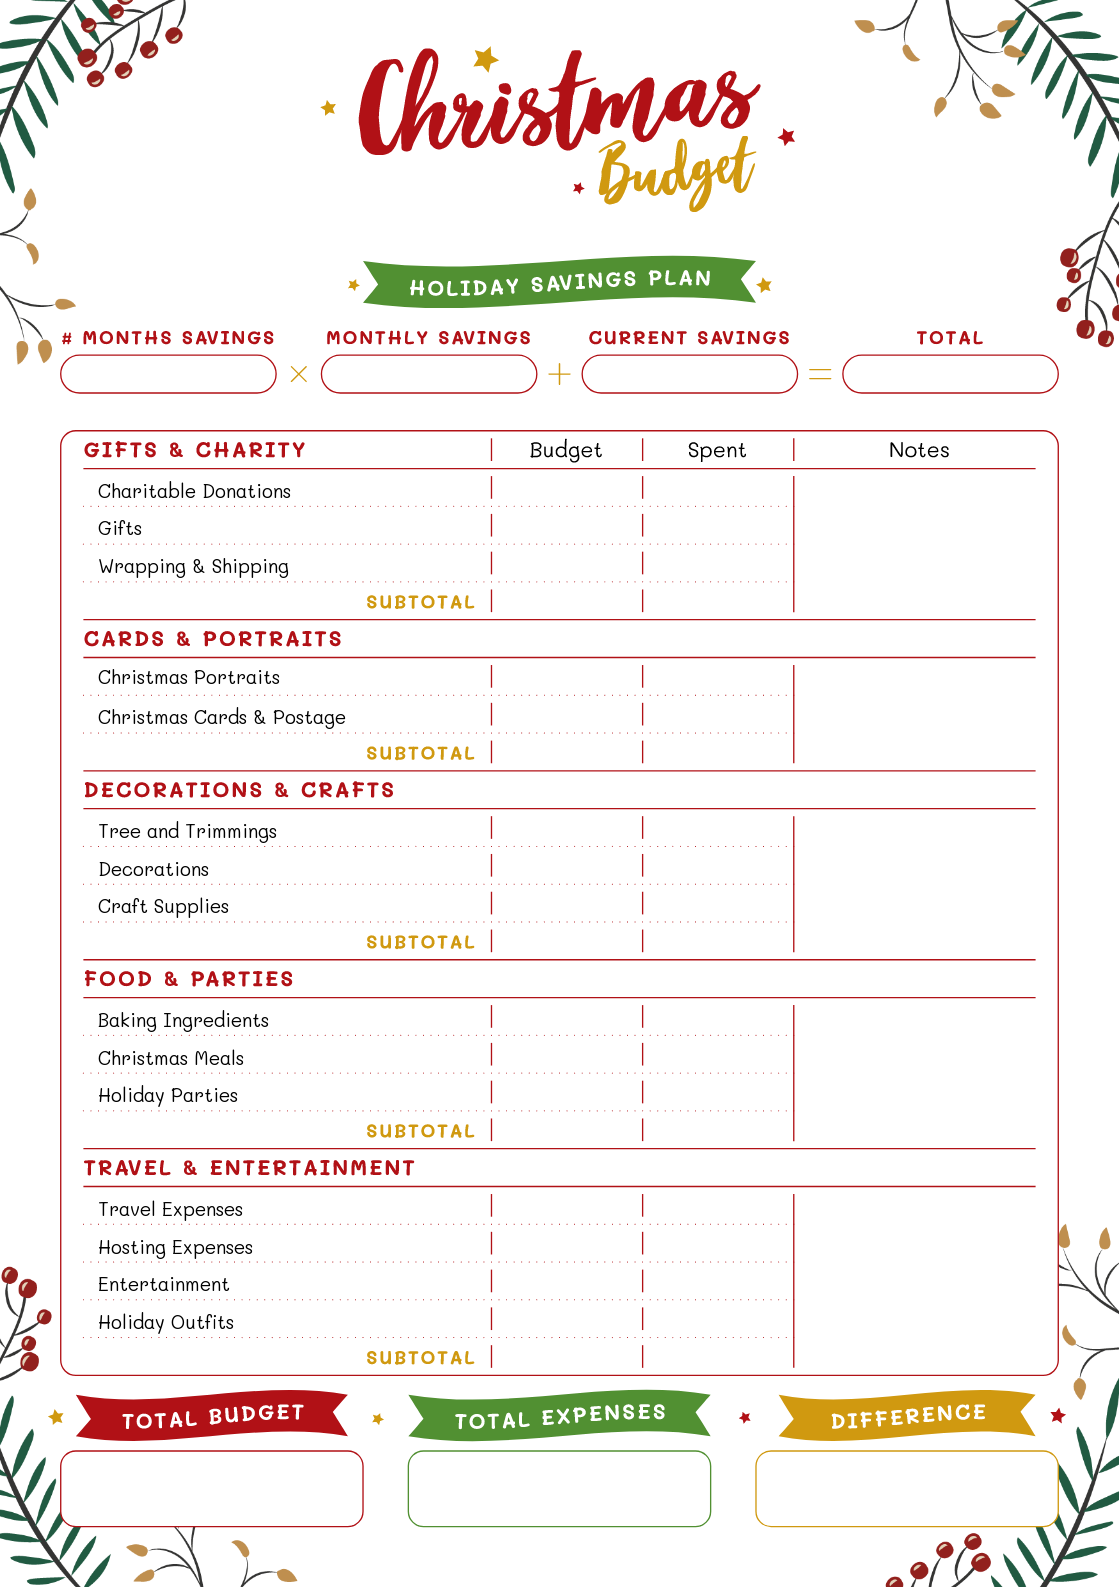 free printable party planner checklist